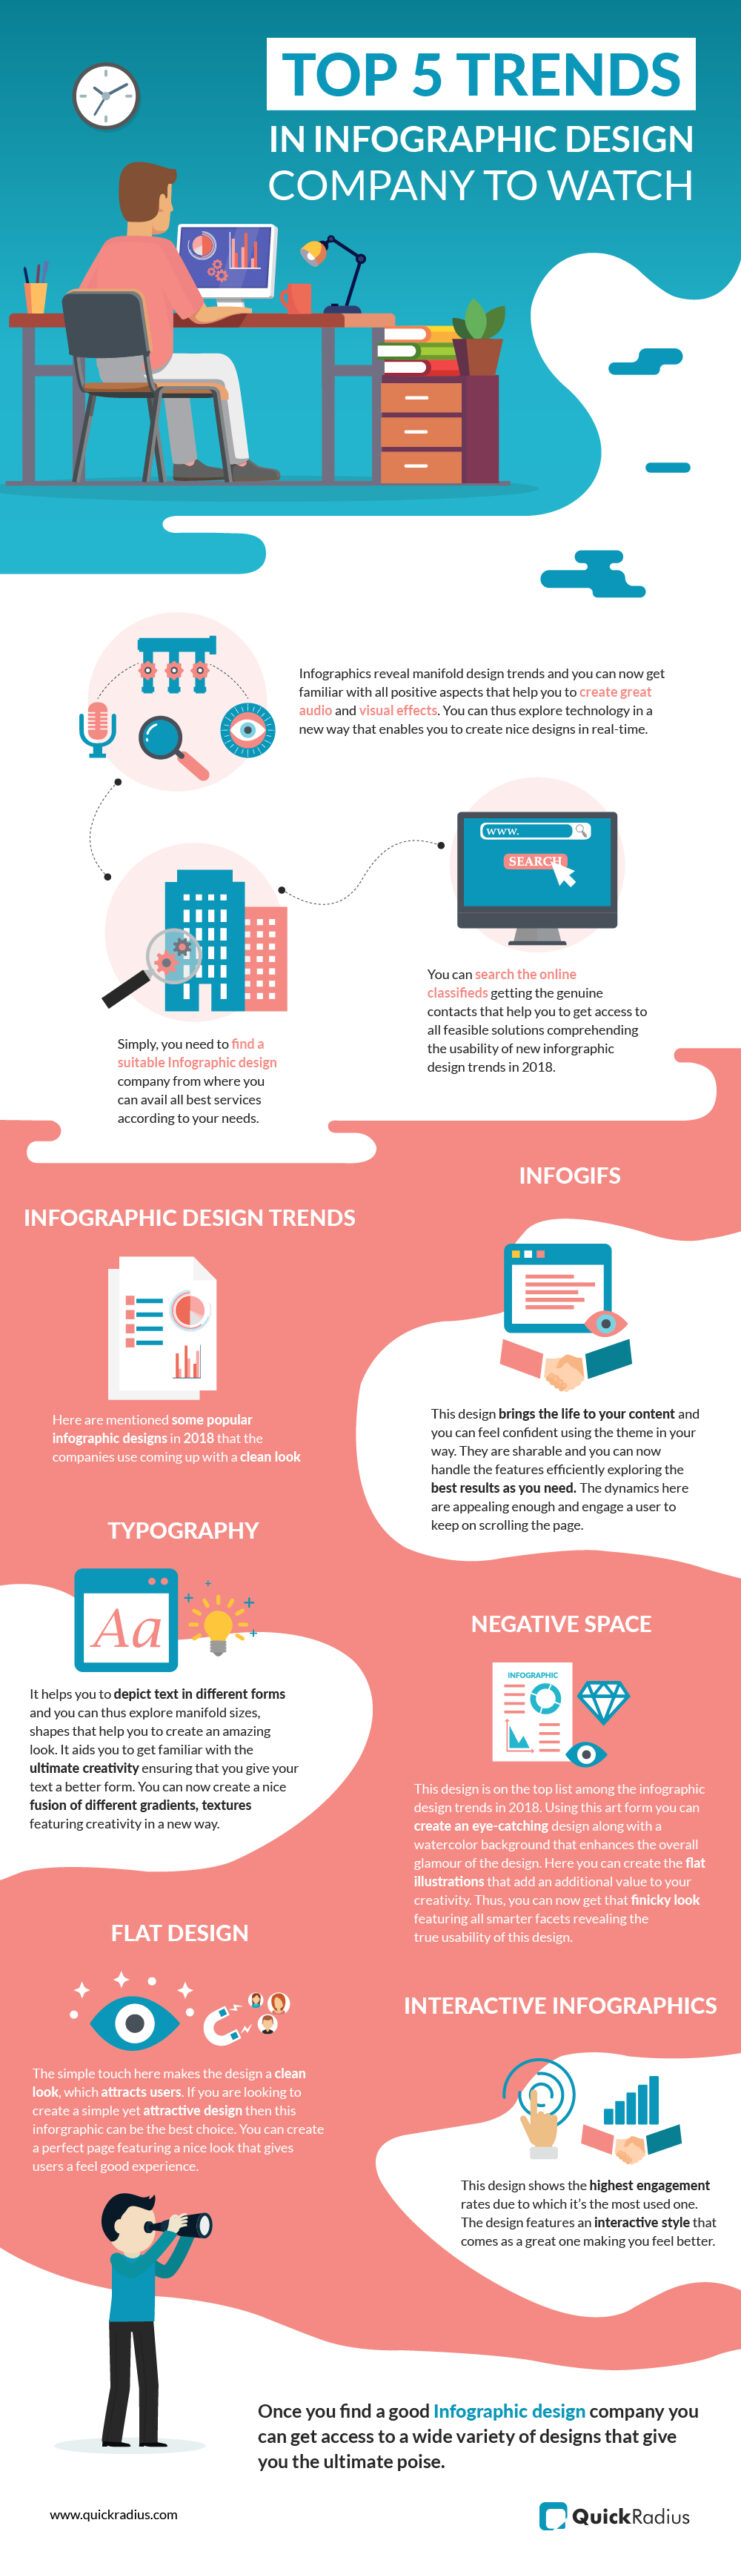 101 Best Infographic Examples for Beginners (2021 List) | Infographic examples, Infographic ...